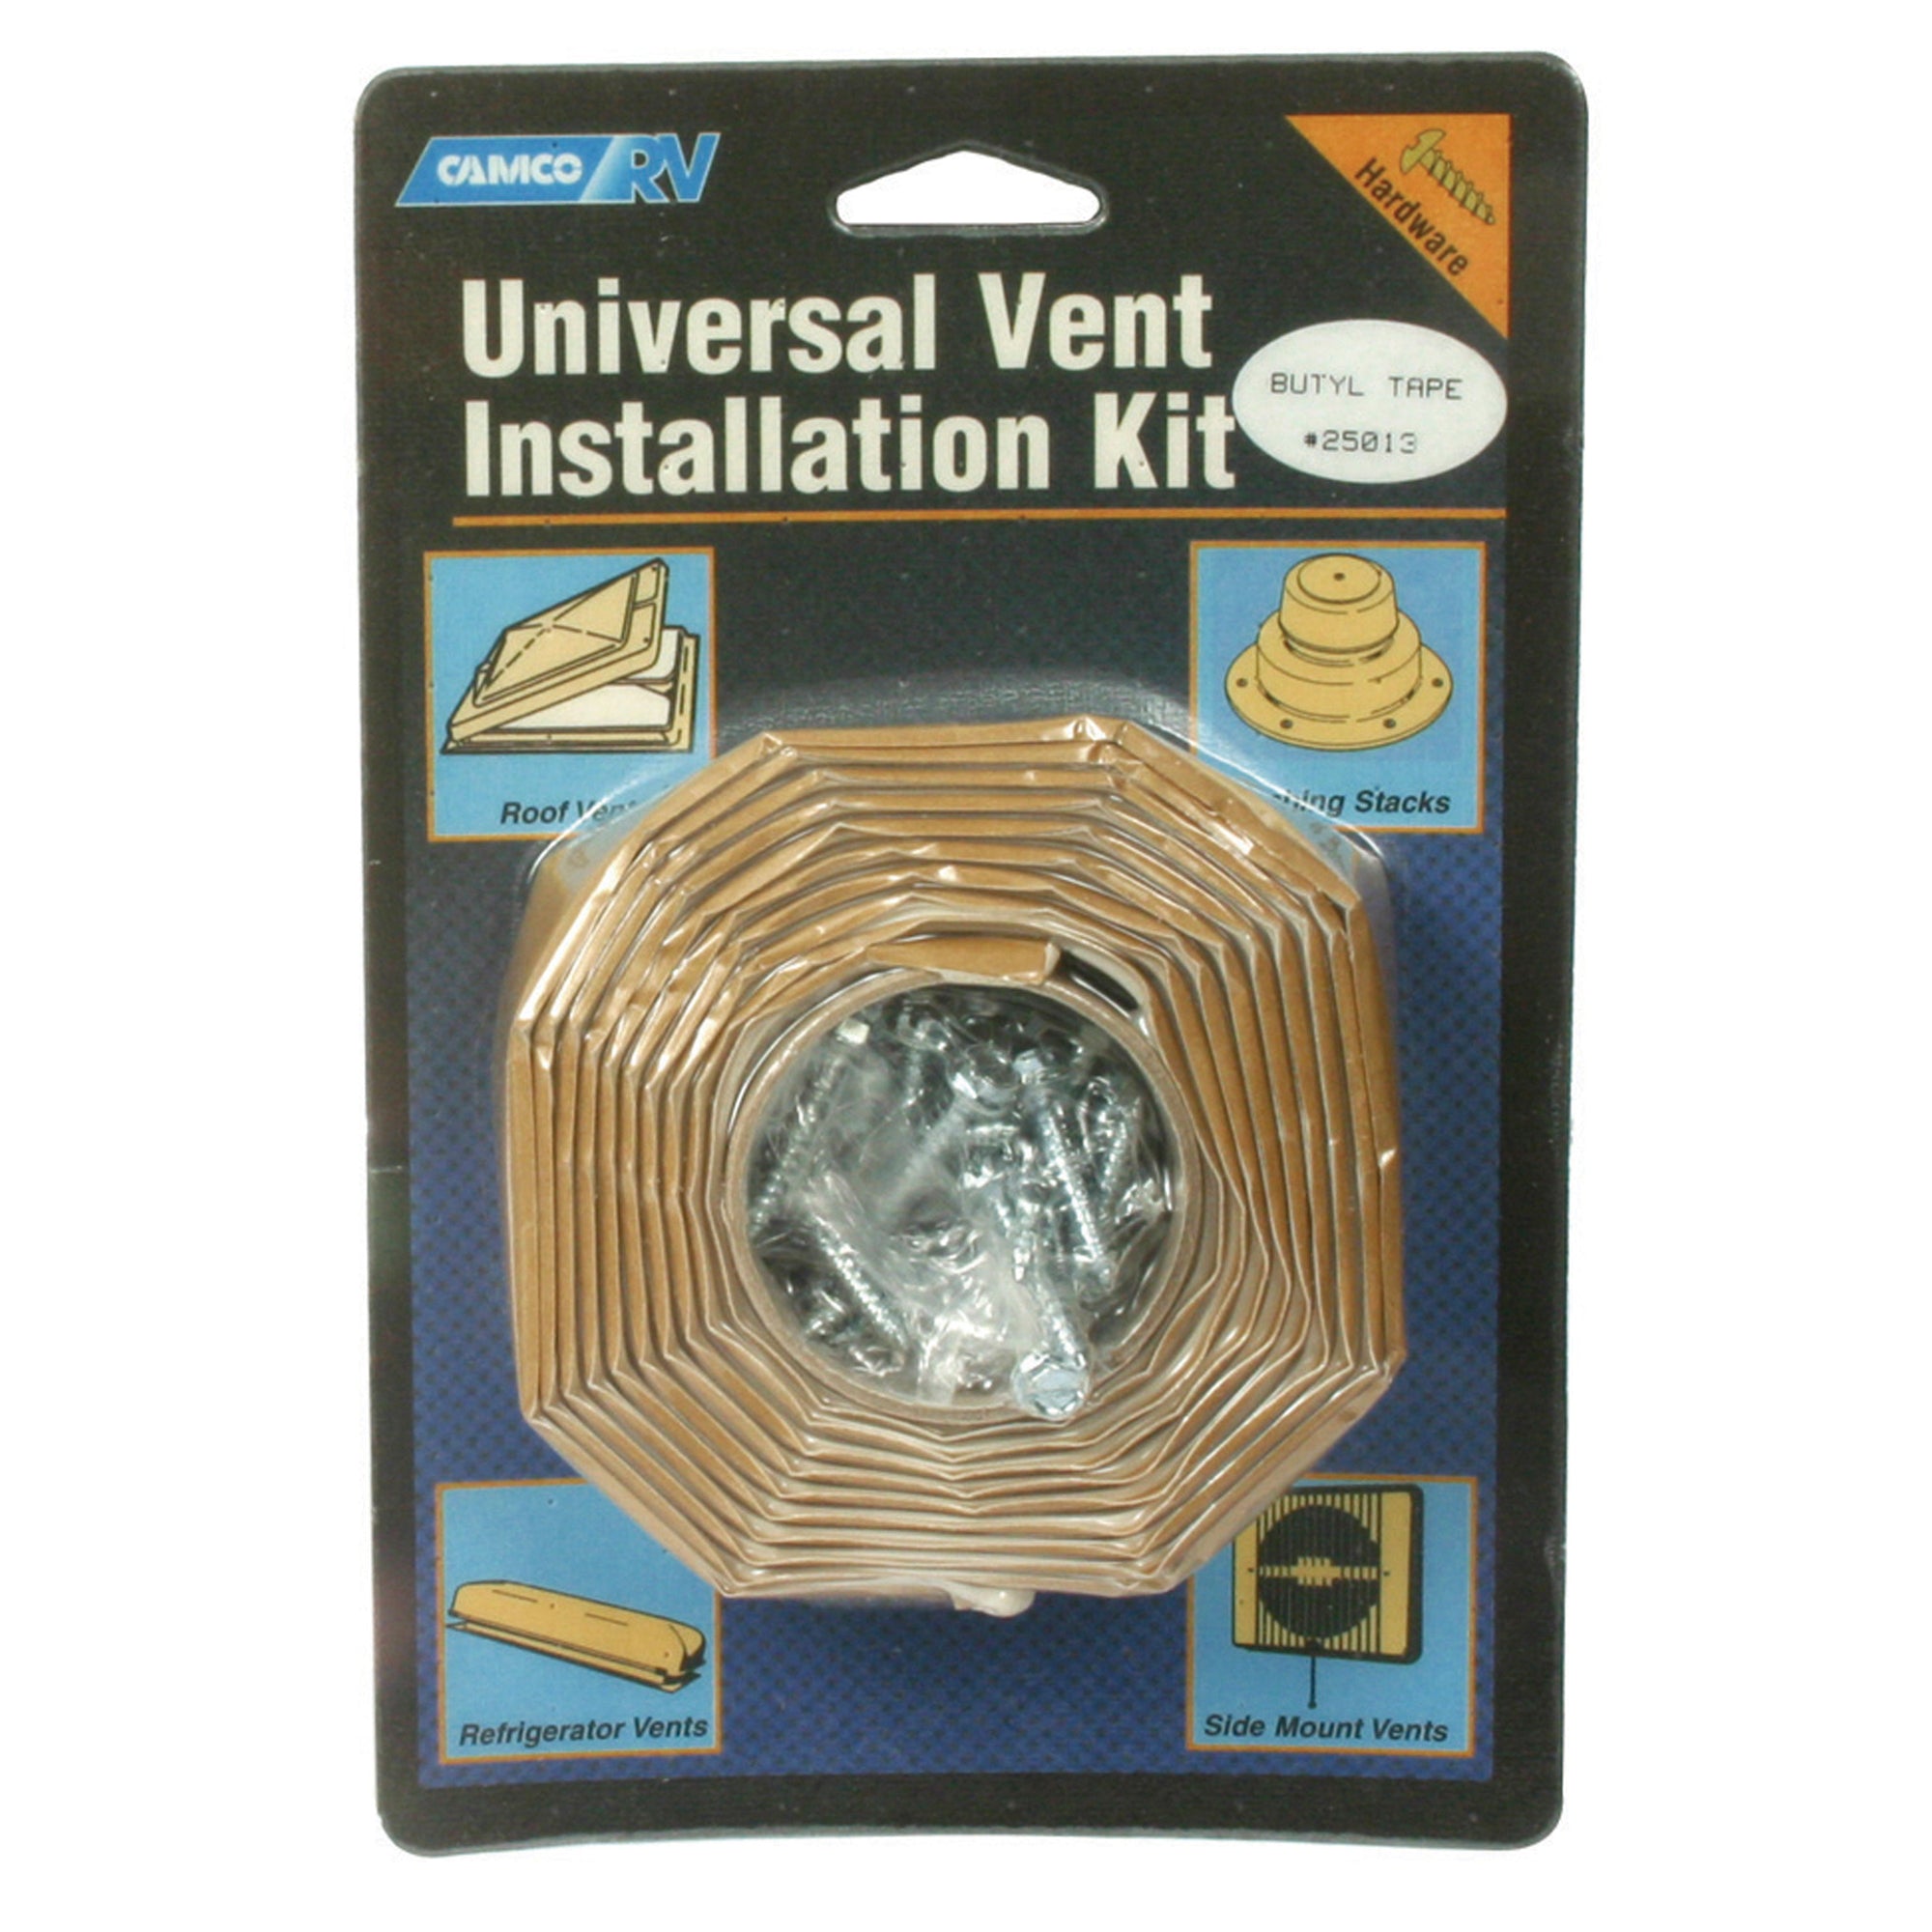 Camco 25013 Universal Vent Installation Kit